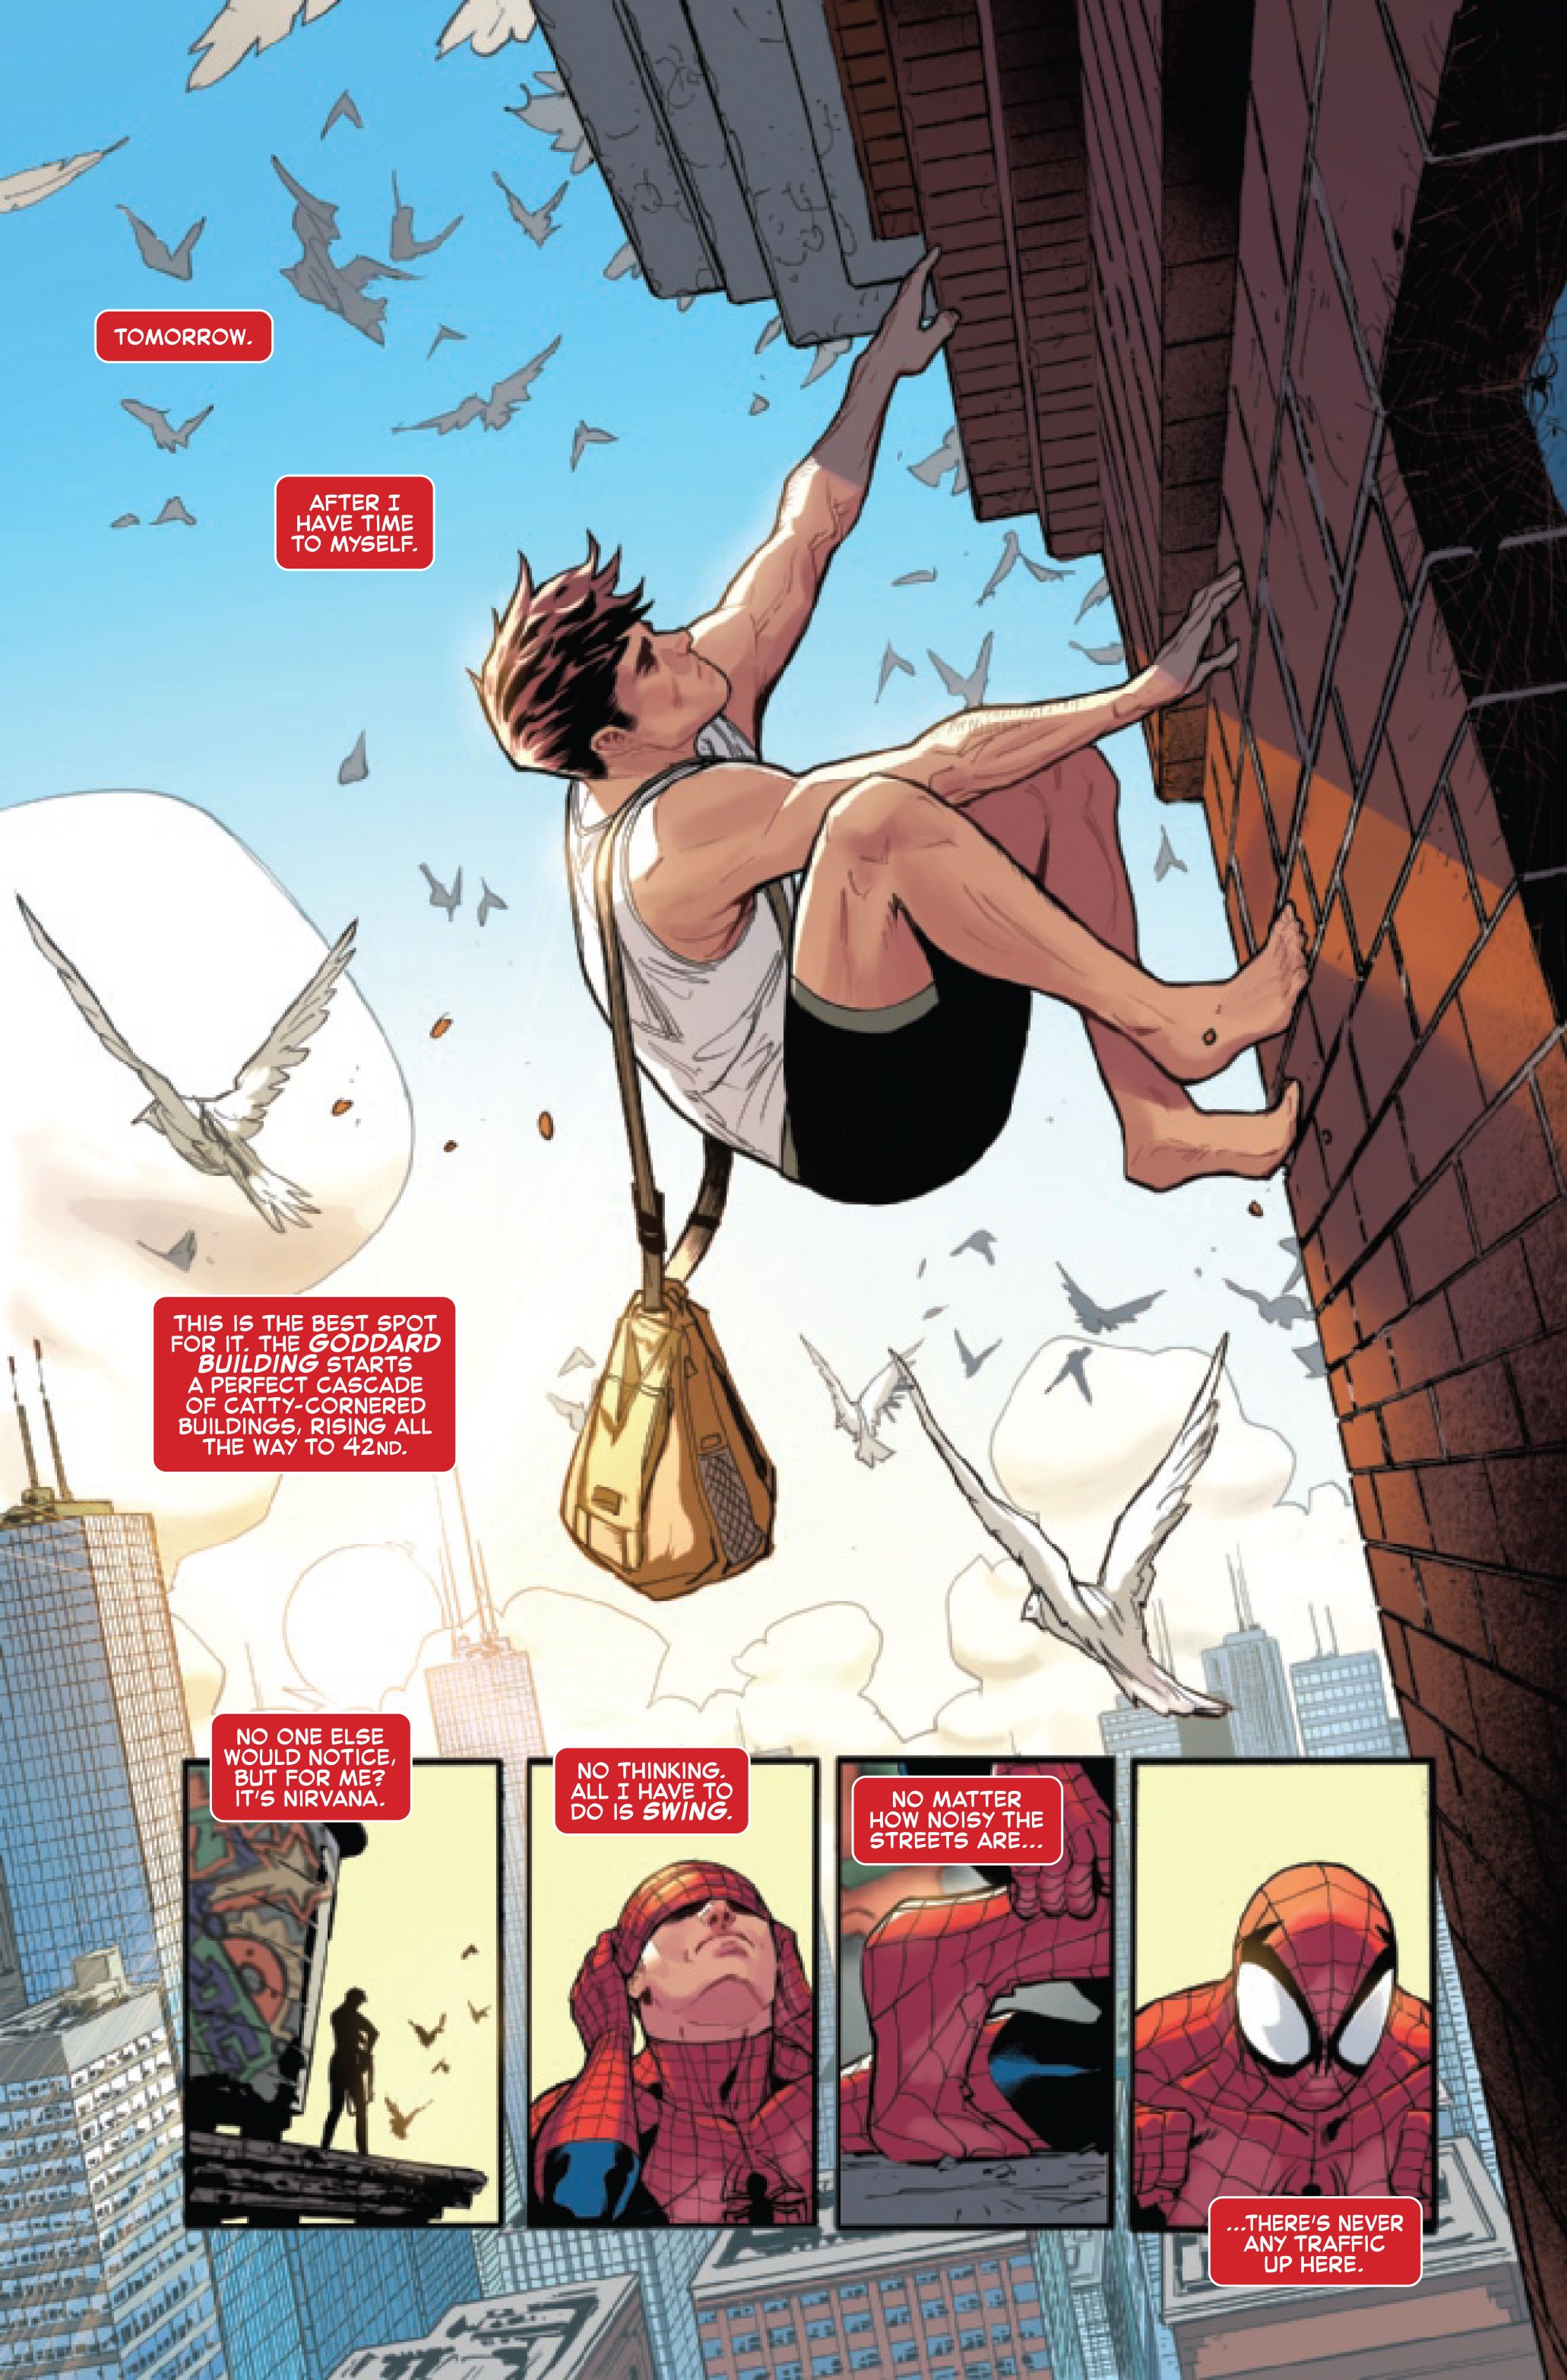 Amazing Spider-Man #75 page 4 by Zeb Wells and Patrick Gleason.